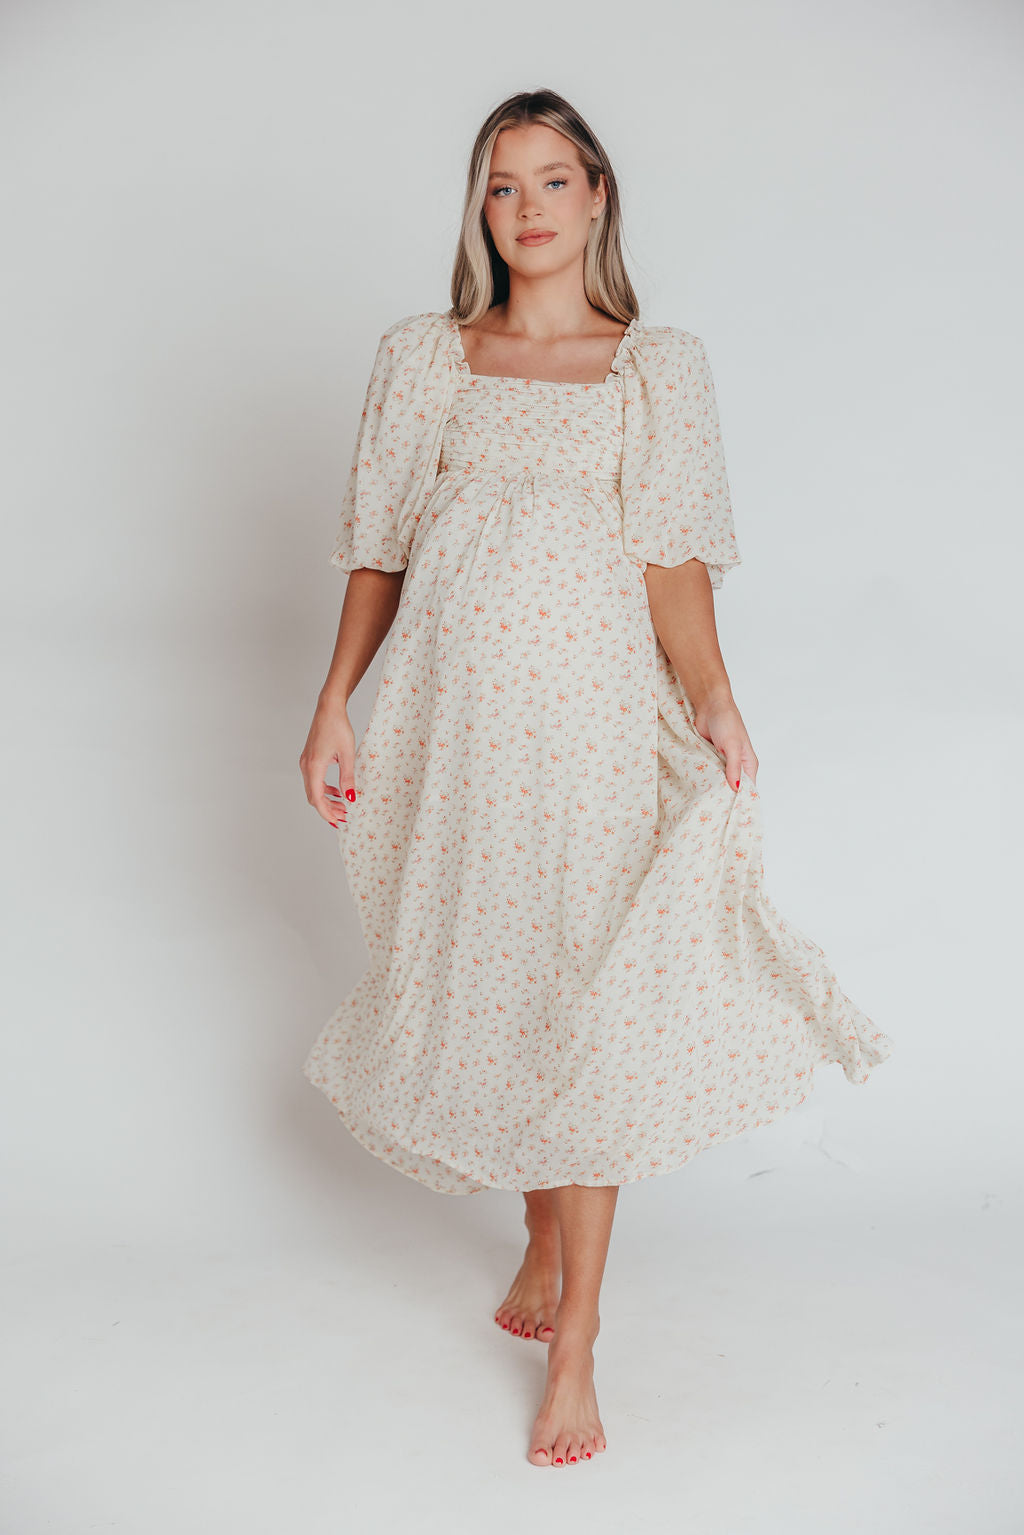 Melody Maxi Dress with Pleats and Bow Detail in Ivory Floral- Bump Friendly & Inclusive Sizing (S-3XL)  $30 OFF THIS WEEK